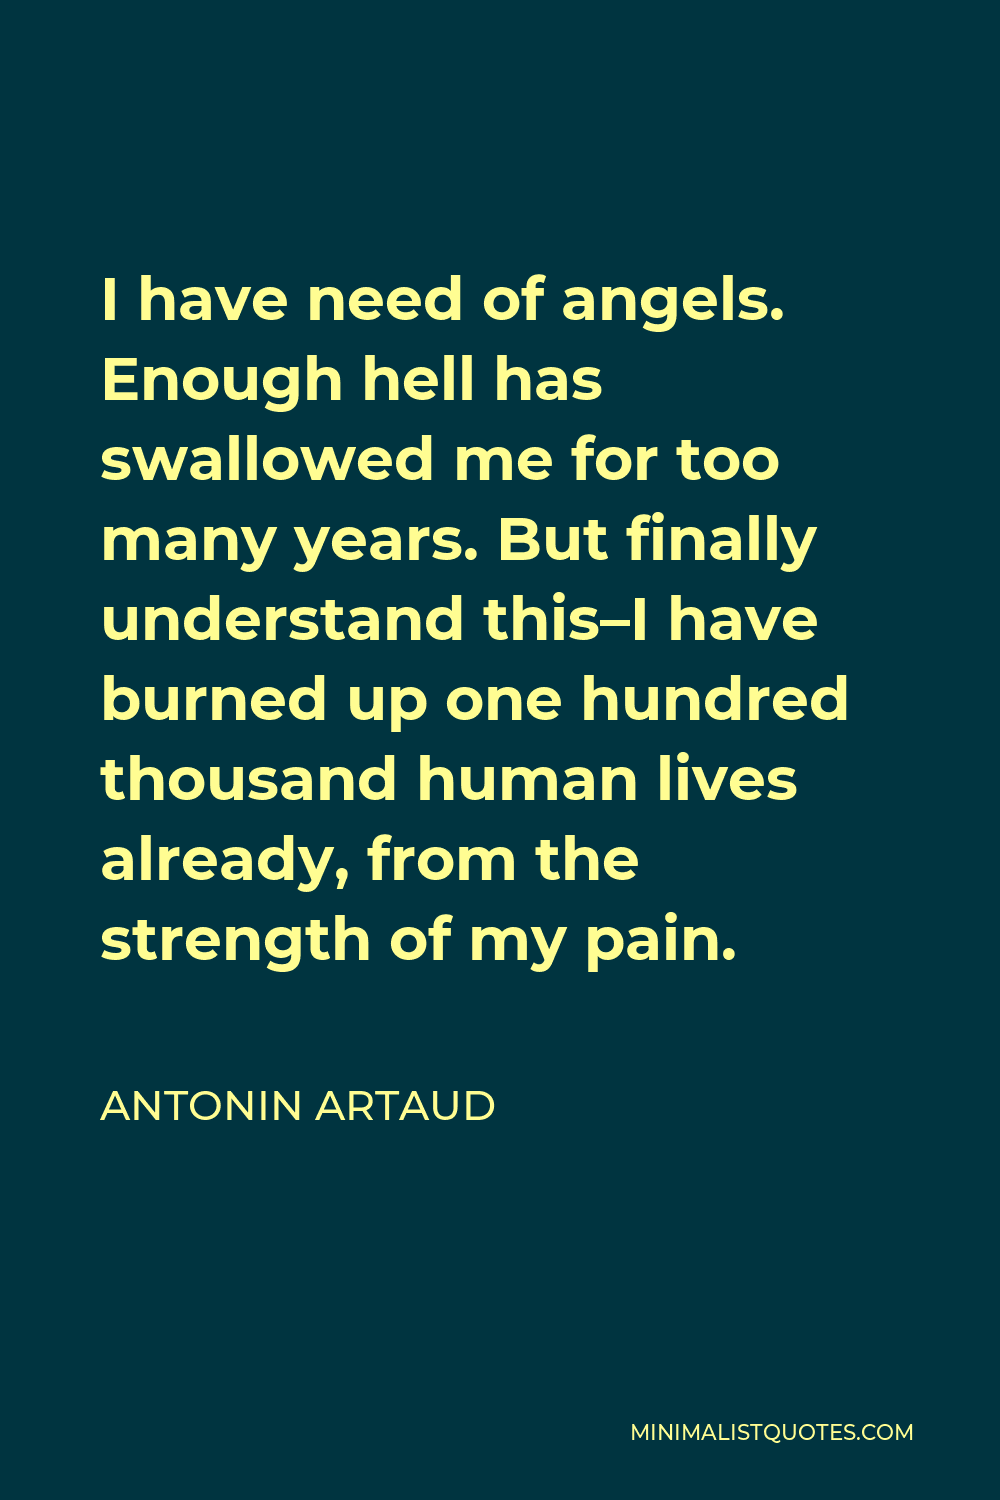 Antonin Artaud Quote - I have need of angels. Enough hell has swallowed me for too many years. But finally understand this–I have burned up one hundred thousand human lives already, from the strength of my pain.